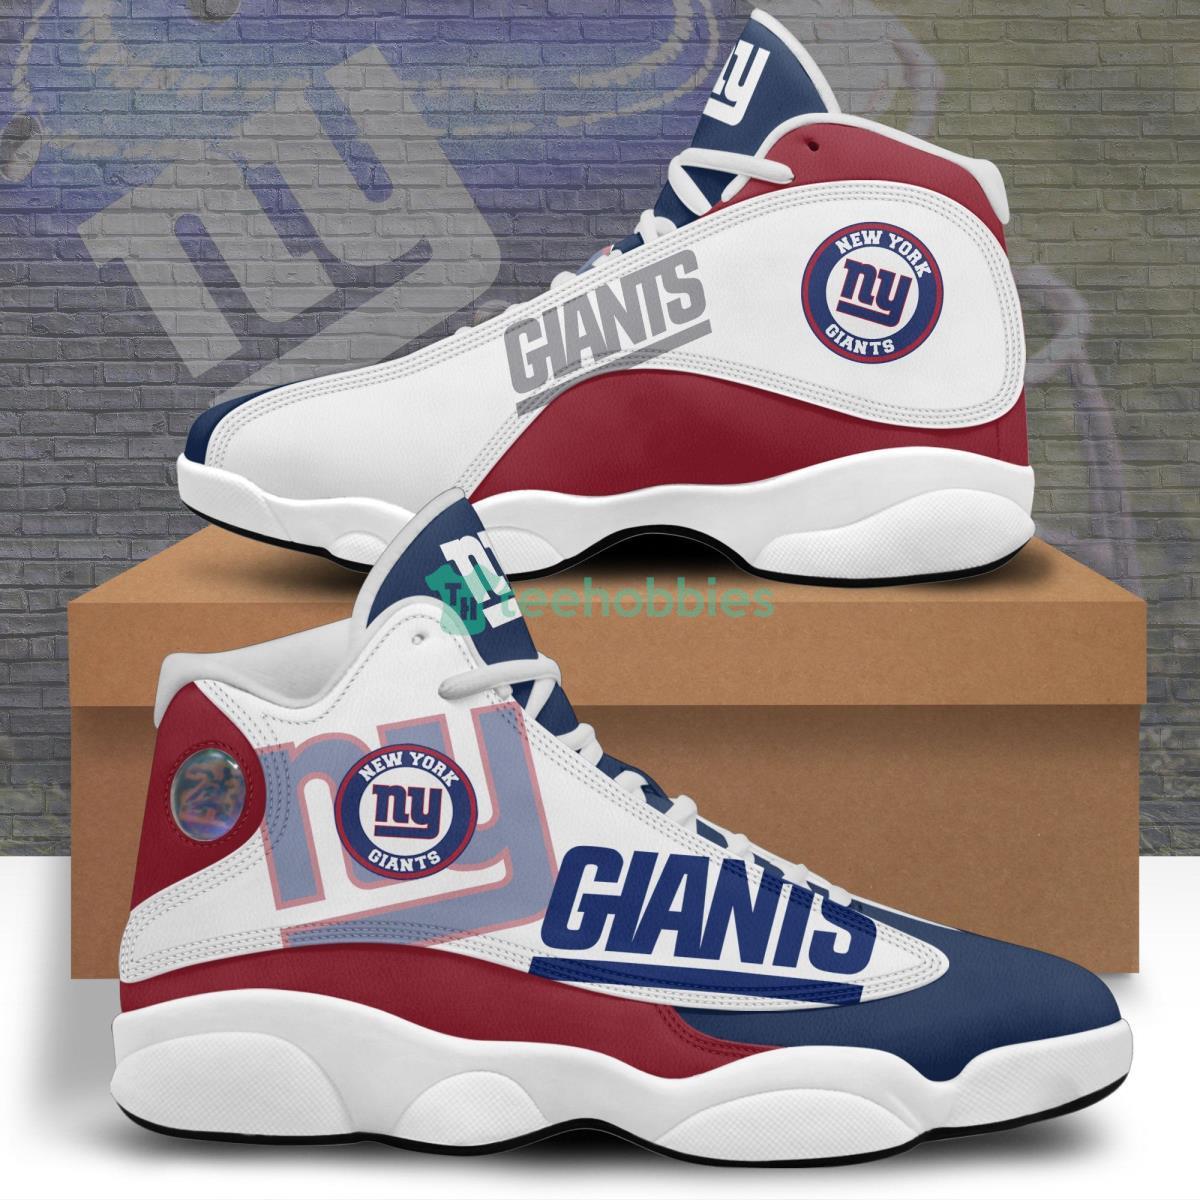 New York Giants Air Jordan 13 Shoes Running Casual Sneakers Best Gift For Fans Product Photo 1